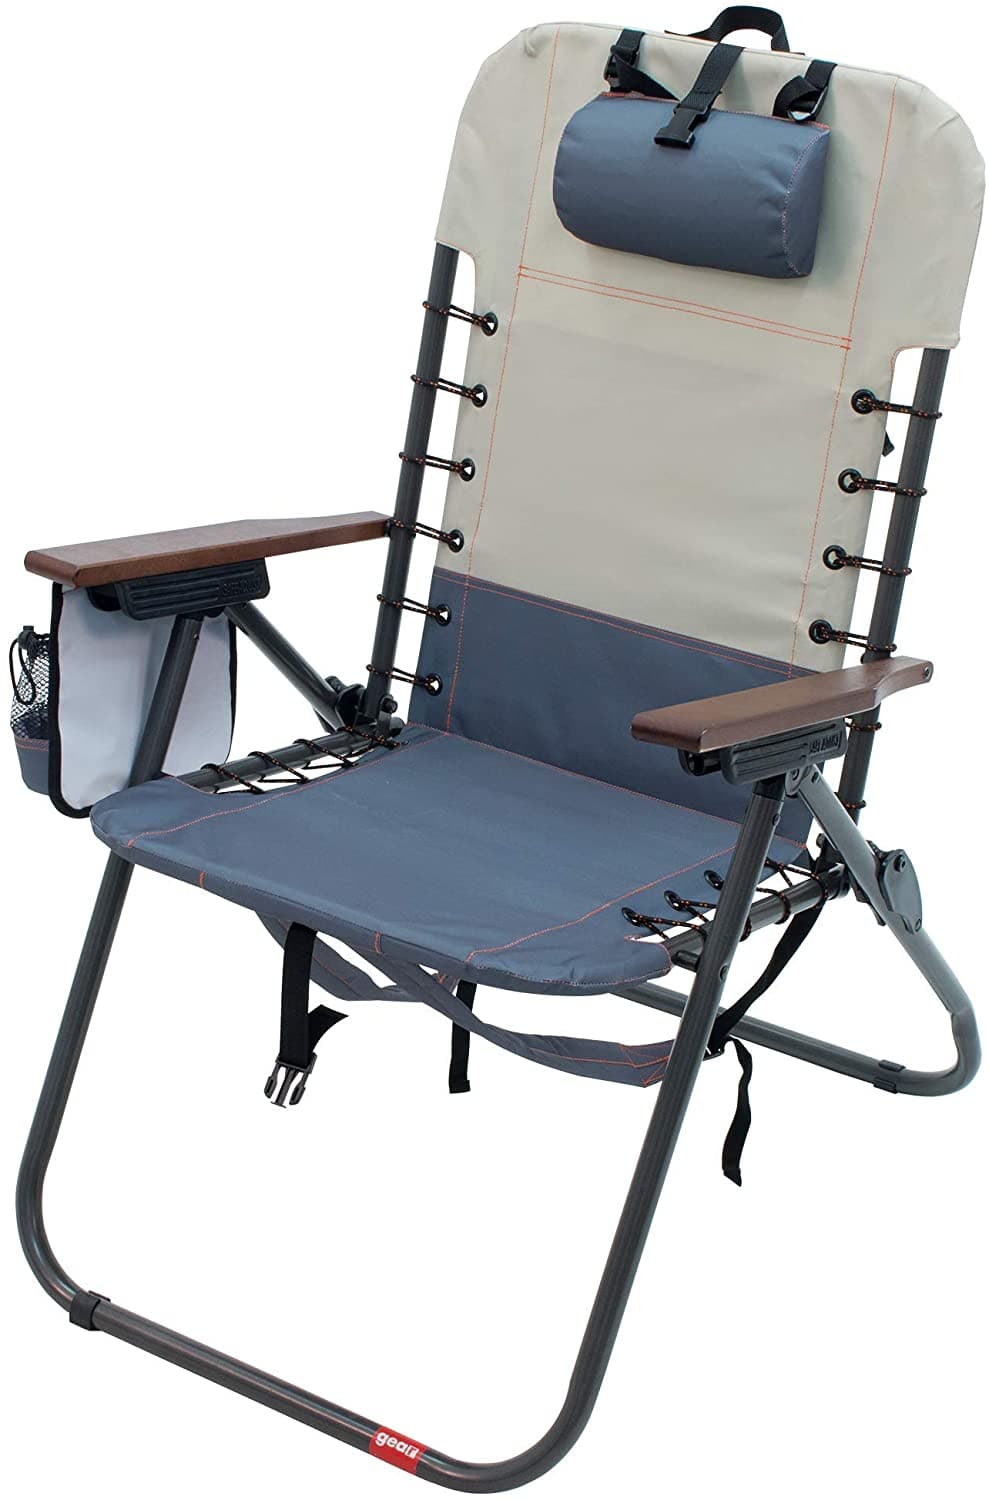 RIO Hi Boy Lace-up Steel Gear Removable Backpack Chair - Slate/Putty - Senior.com Portable Chairs